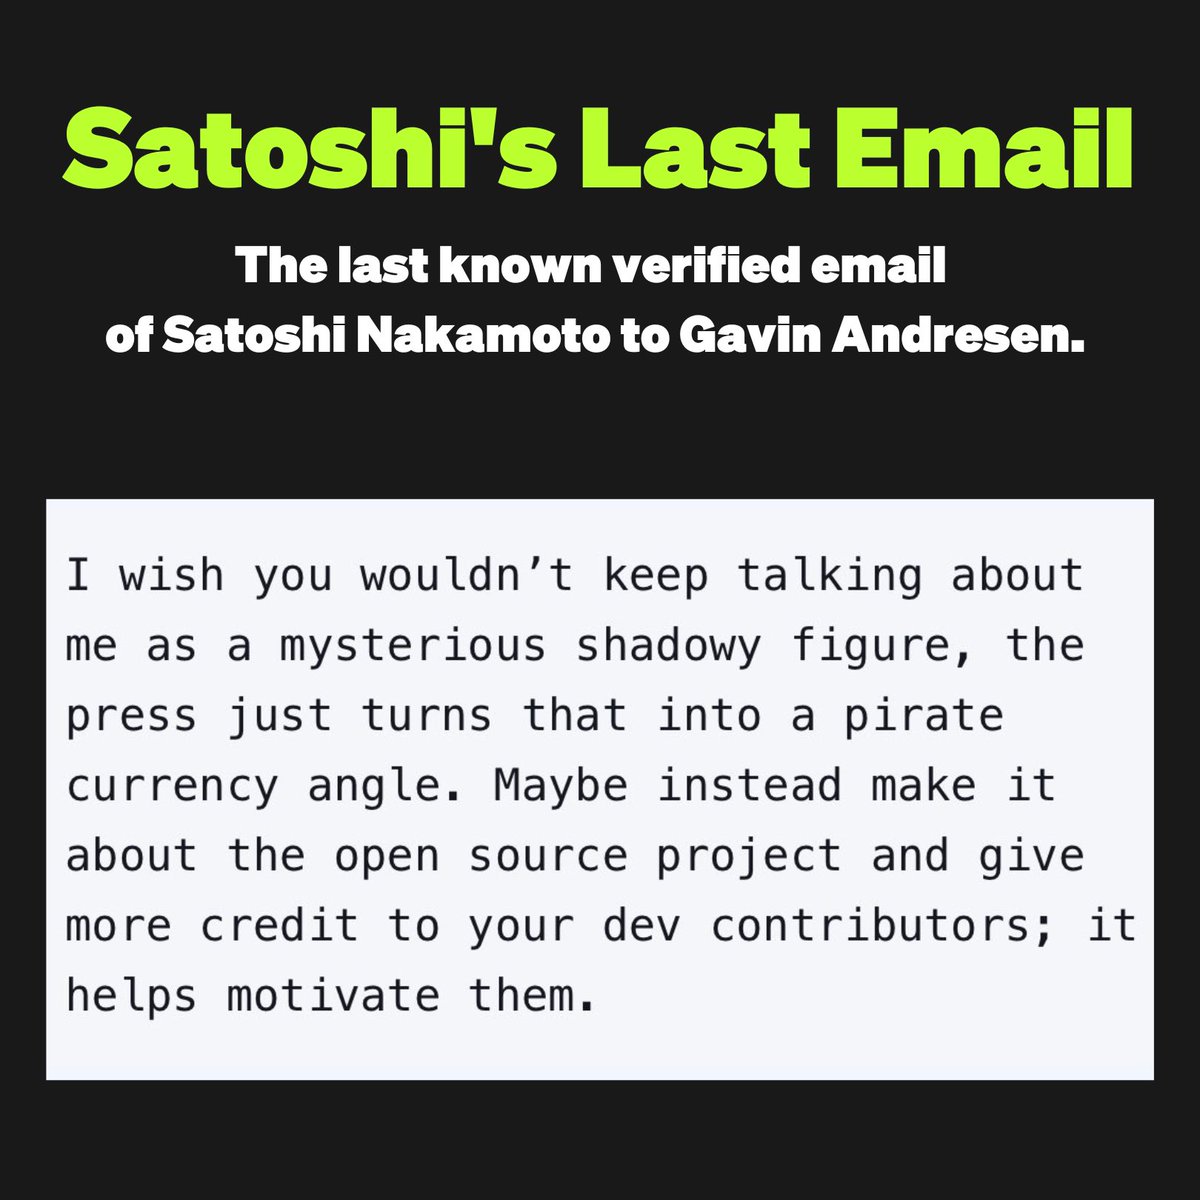 Satoshi’s last email! “I wish you wouldn’t keep talking about me as a mysterious shadowy figure, the press just turns that into a pirate currency angle. Maybe instead make it about the open source project and give more credit to your dev contributors; It helps motivate them.”…